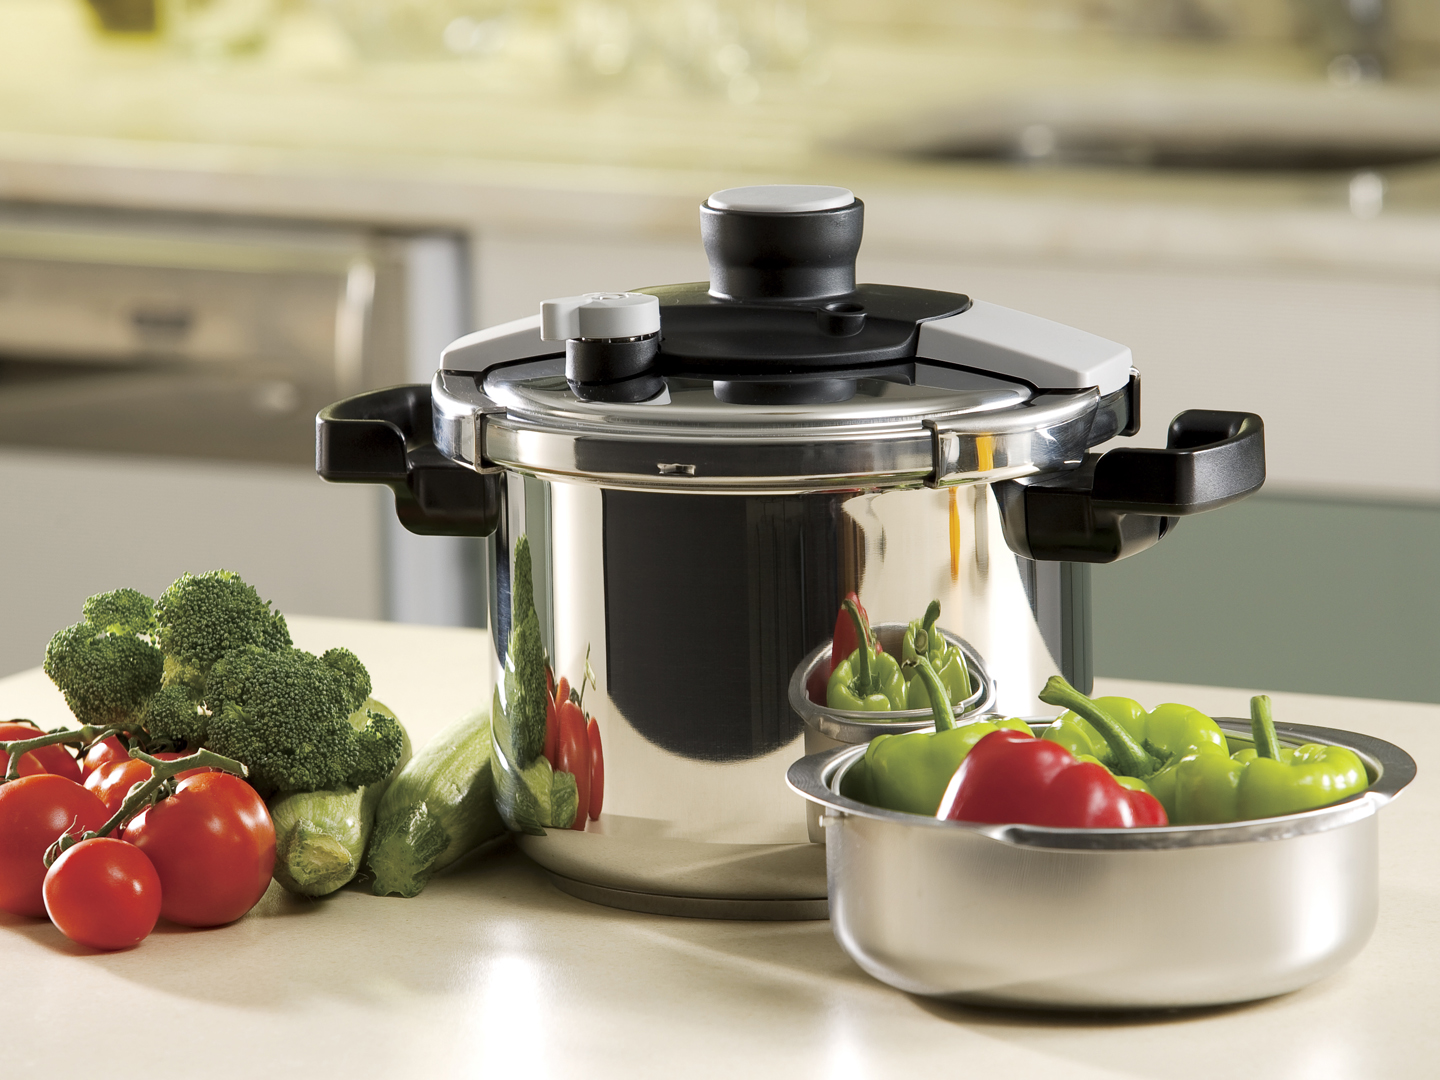 pressure cooker on kitchen counter